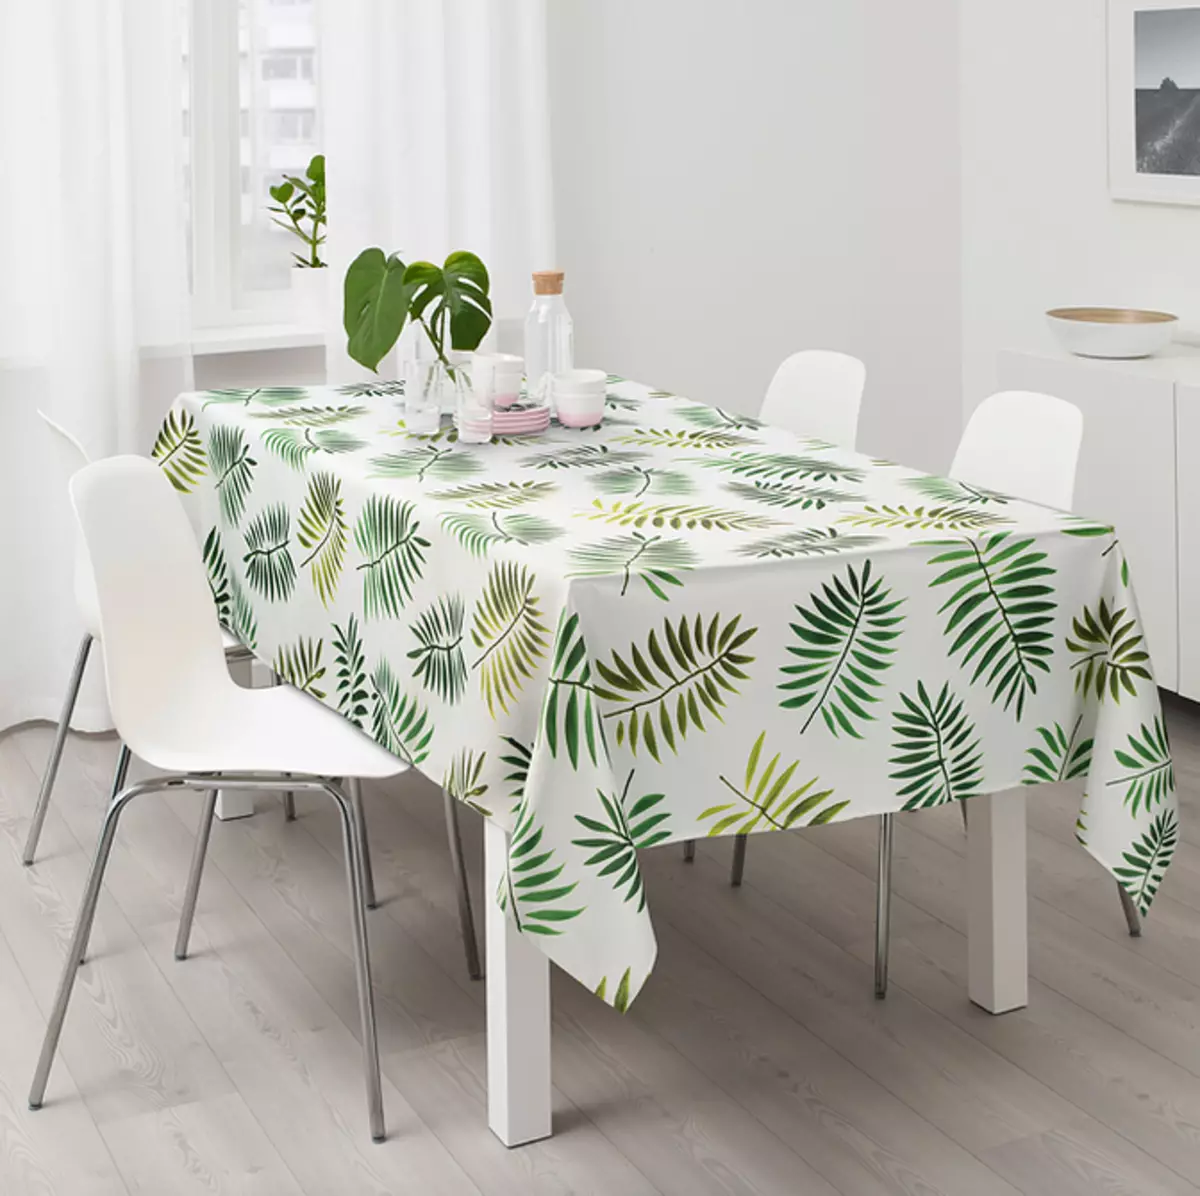 Summer goods from IKEA: 10 items up to 3 000 rubles that will create a sunny mood 7809_33